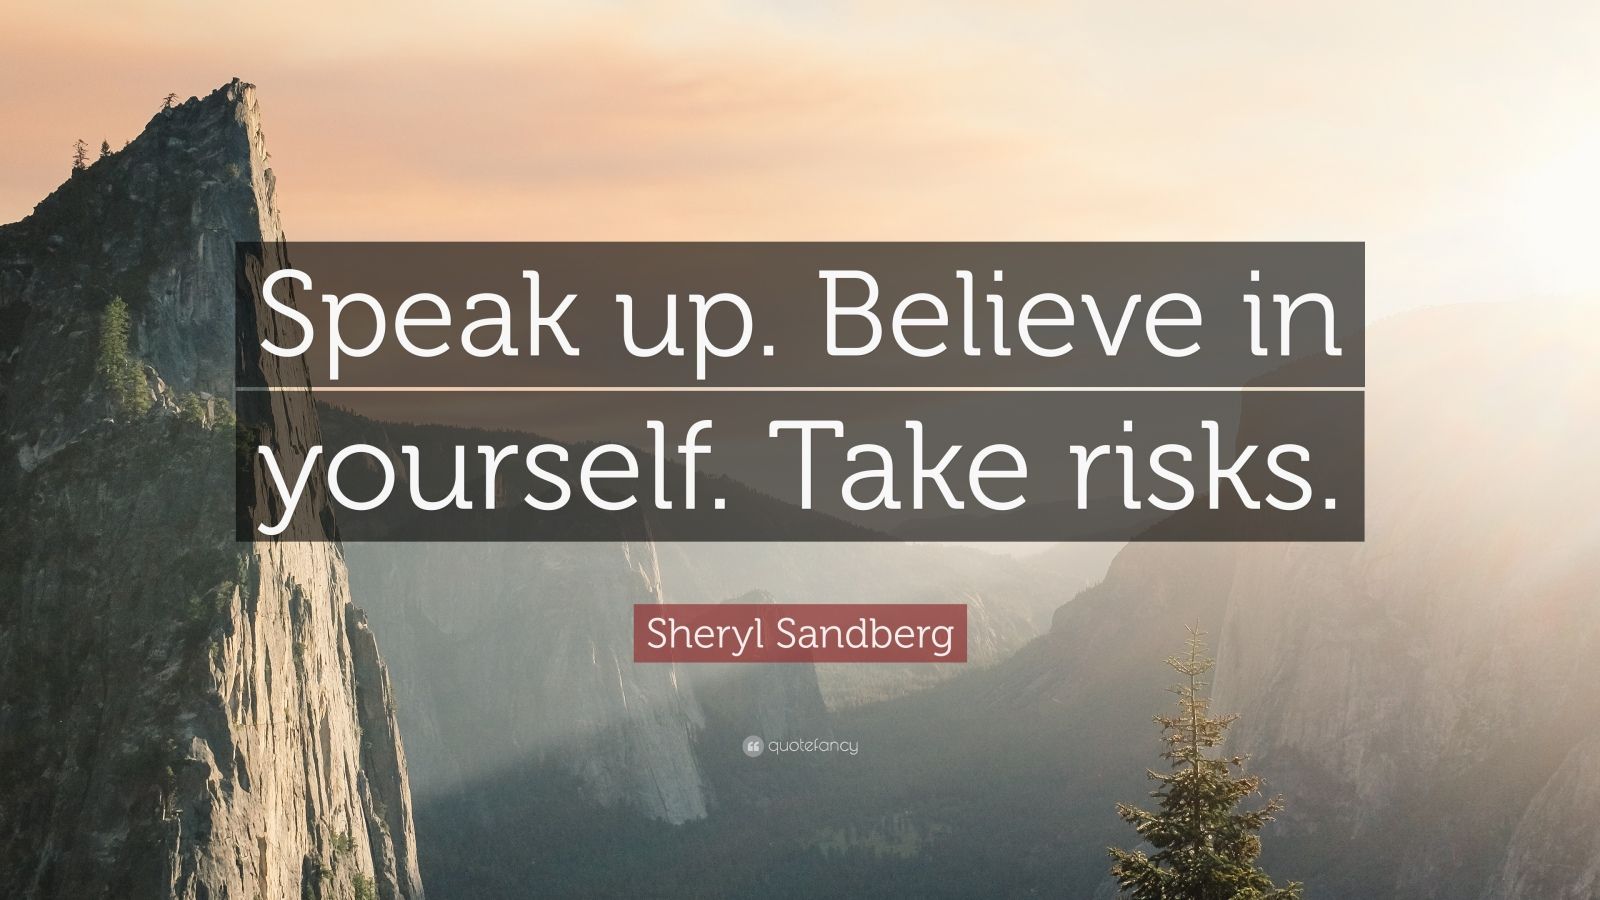 Top 40 Risk Quotes | 2021 Edition | Free Images - QuoteFancy